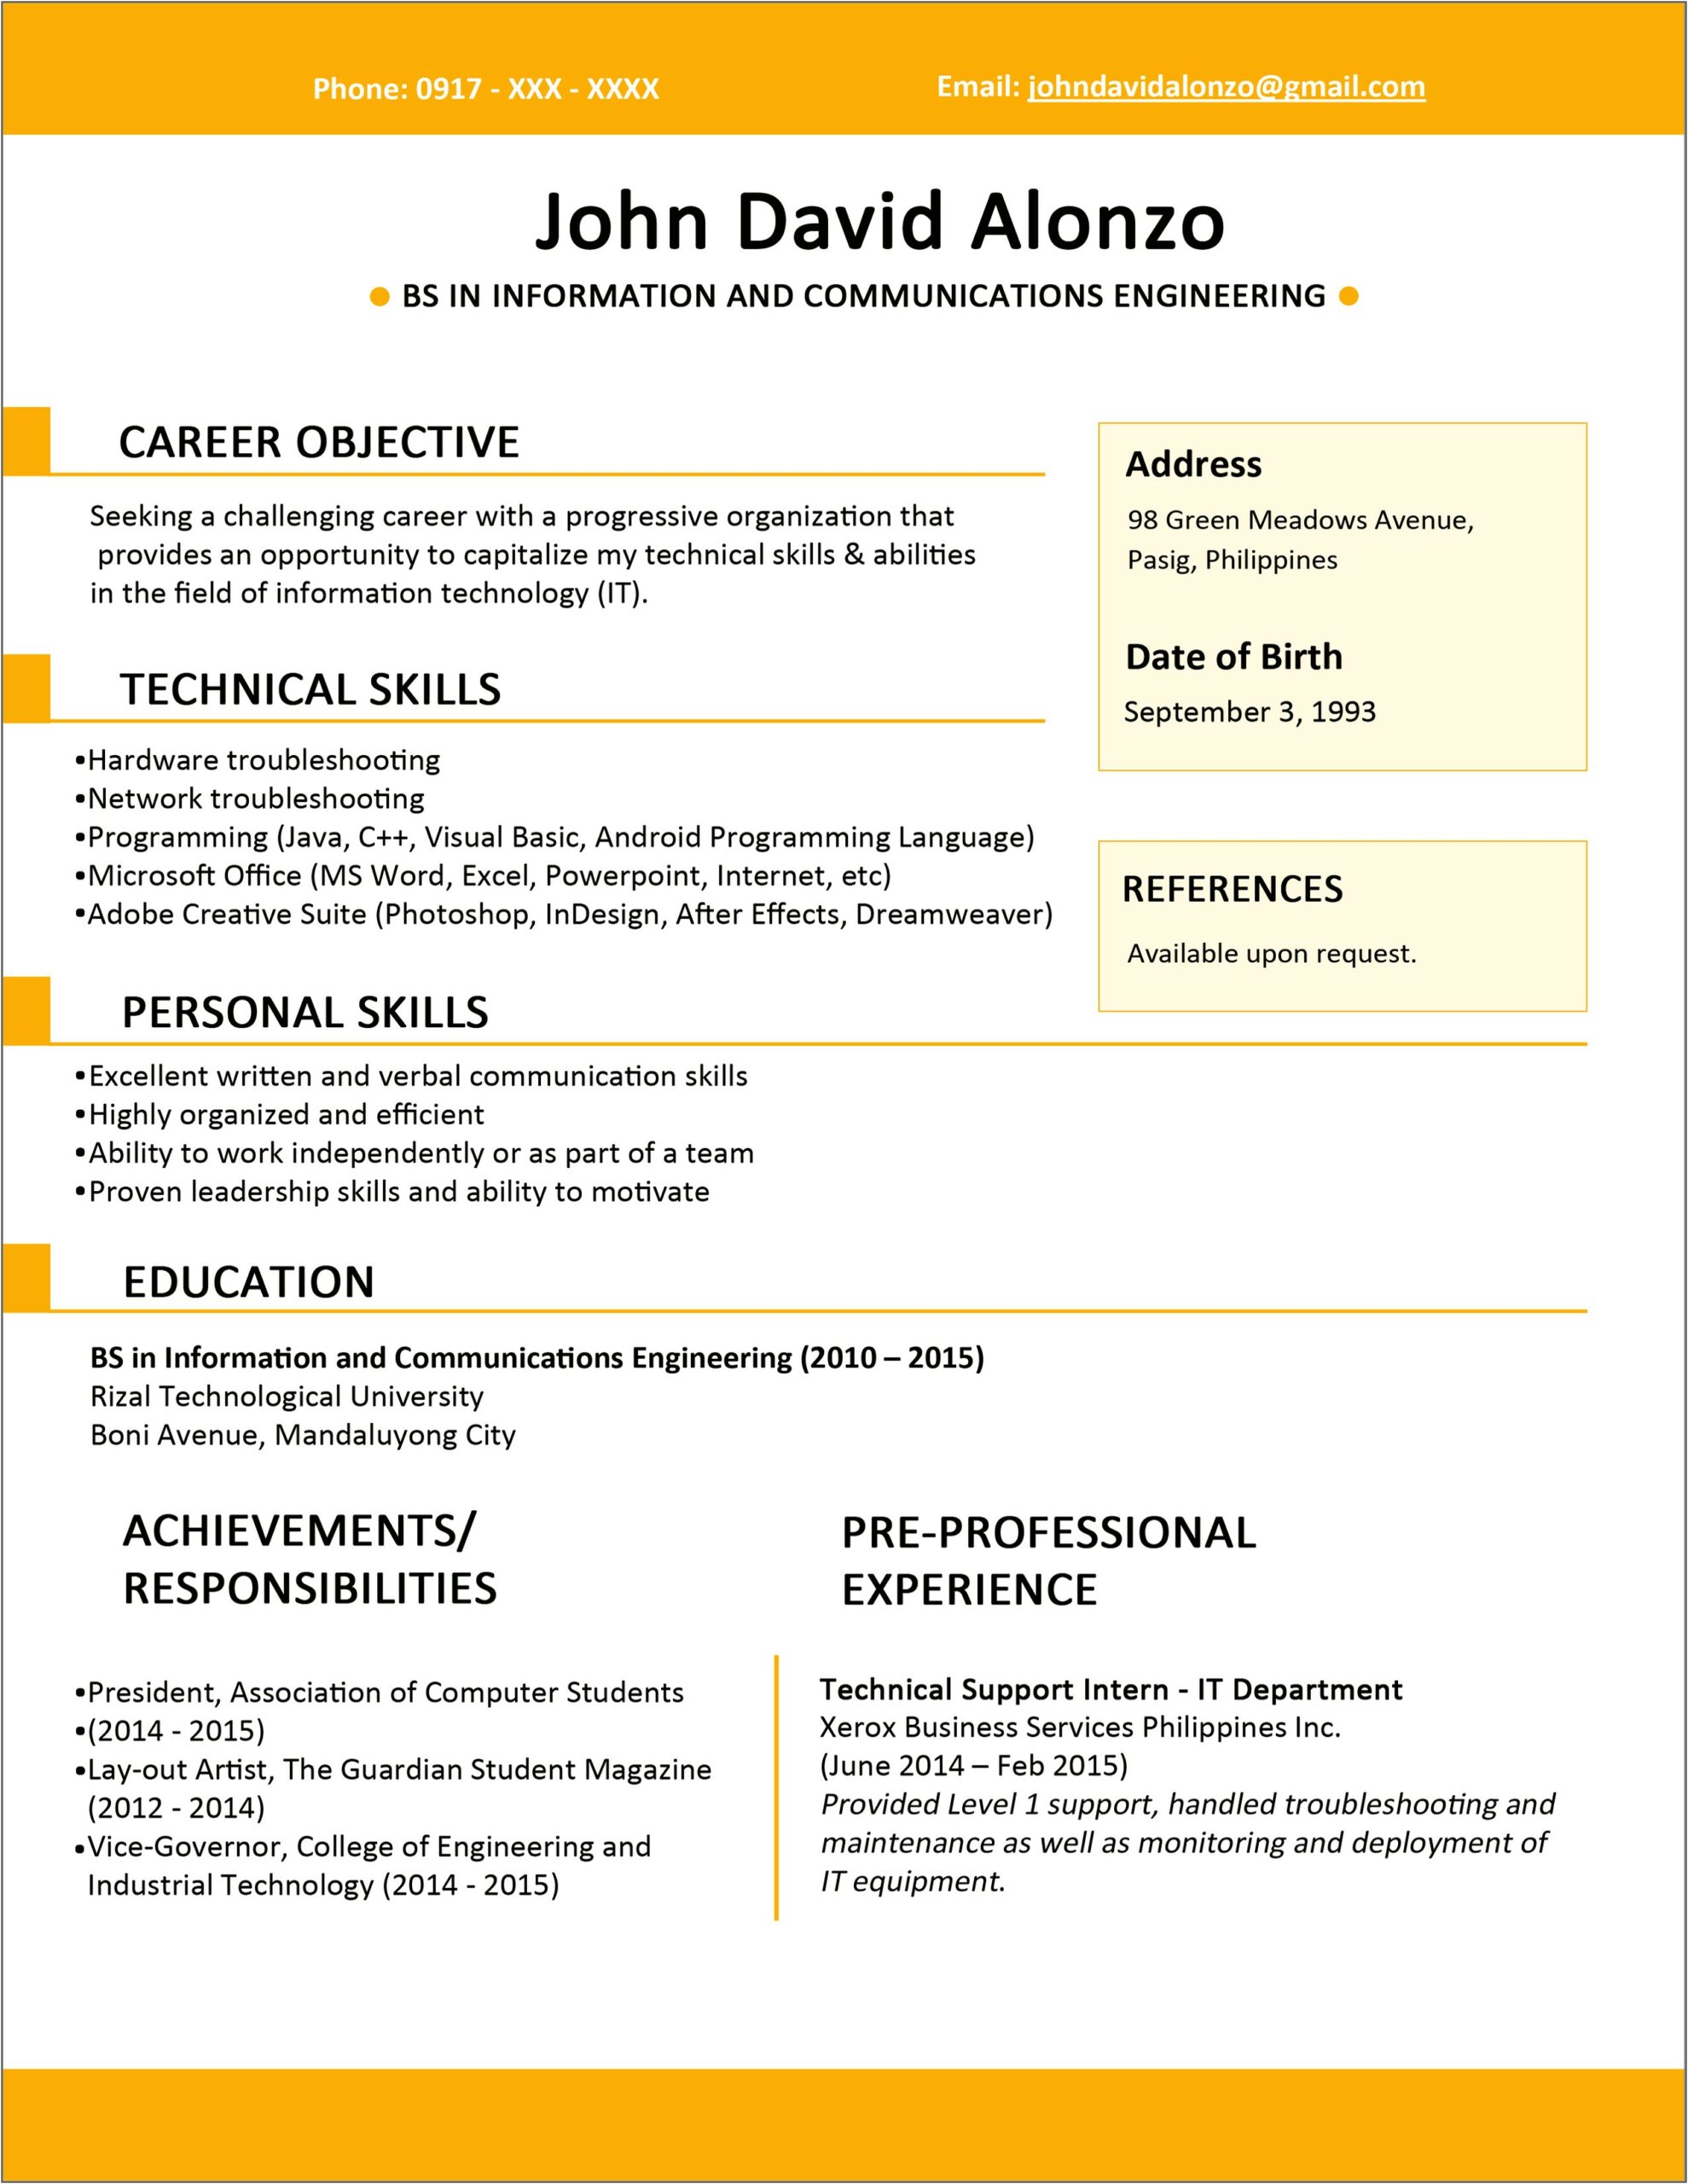 Examles Of Resume Titles For Job